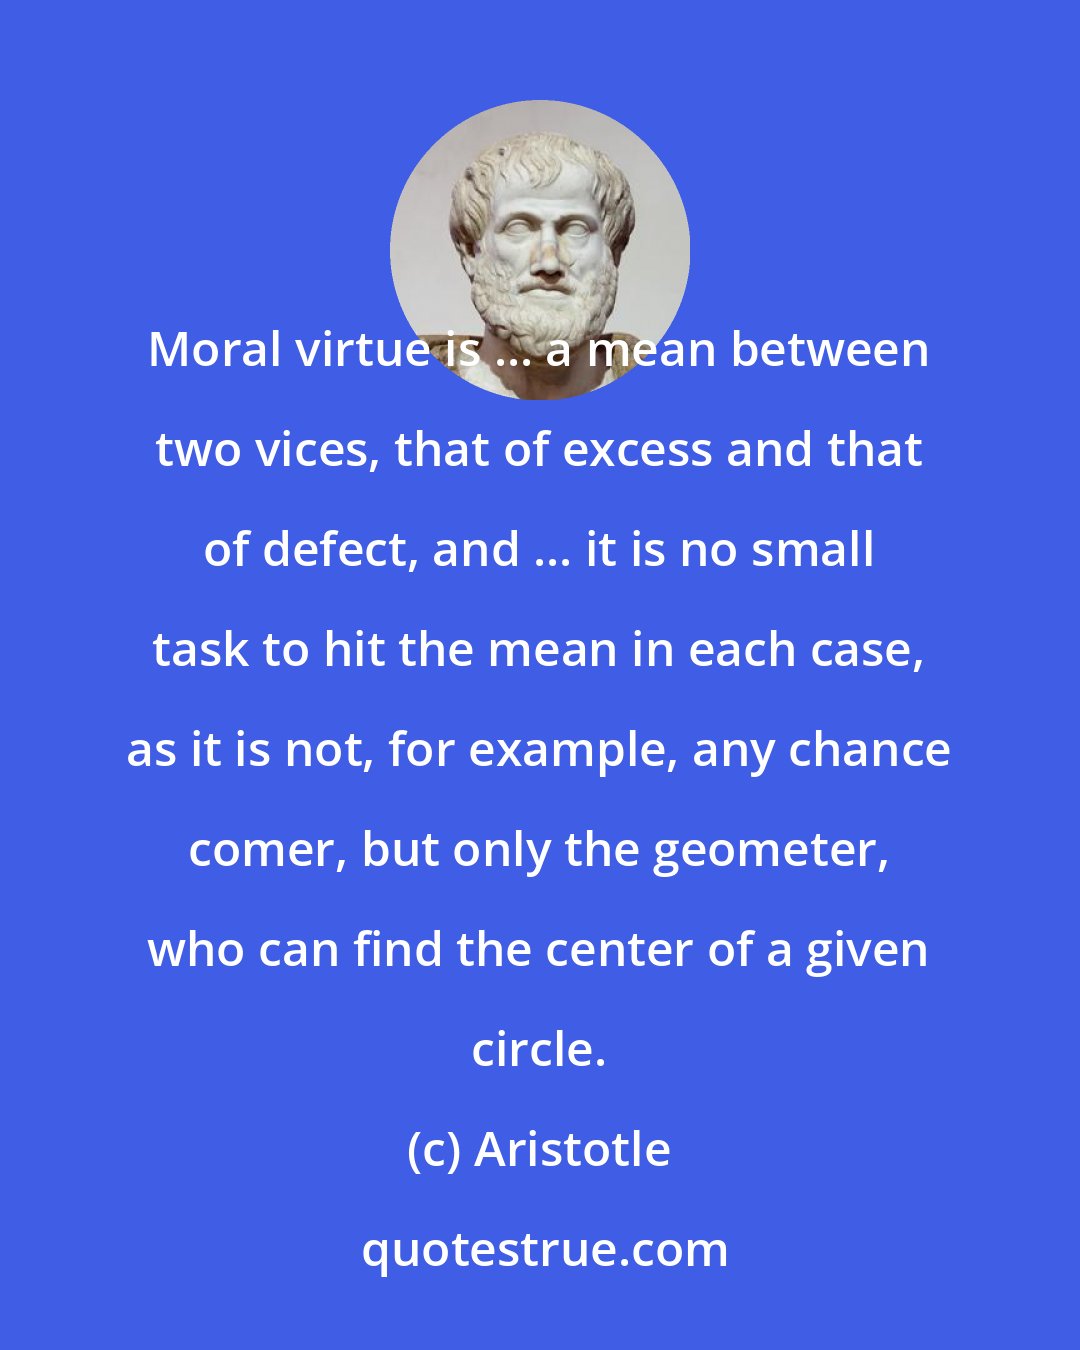 Aristotle: Moral virtue is ... a mean between two vices, that of excess and that of defect, and ... it is no small task to hit the mean in each case, as it is not, for example, any chance comer, but only the geometer, who can find the center of a given circle.